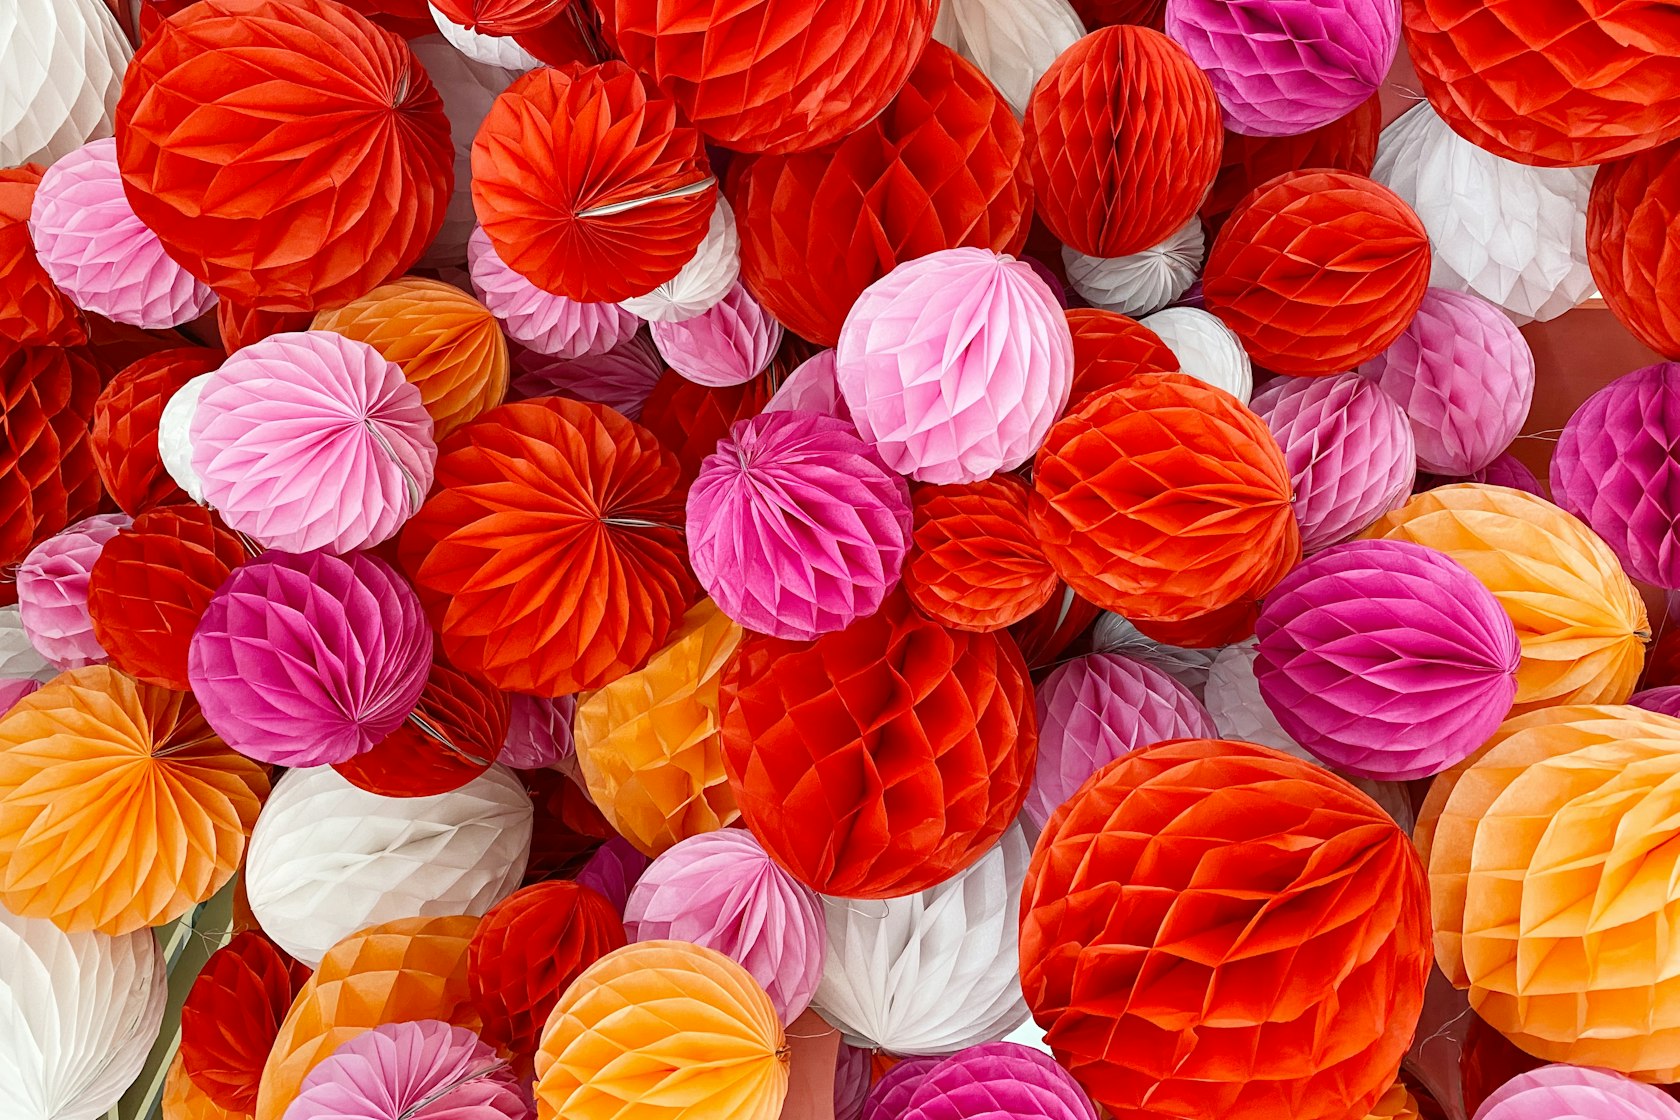 Multicolored,Paper,Pom-poms,Or,Honeycomb,Paper,Balls,For,The,Holiday